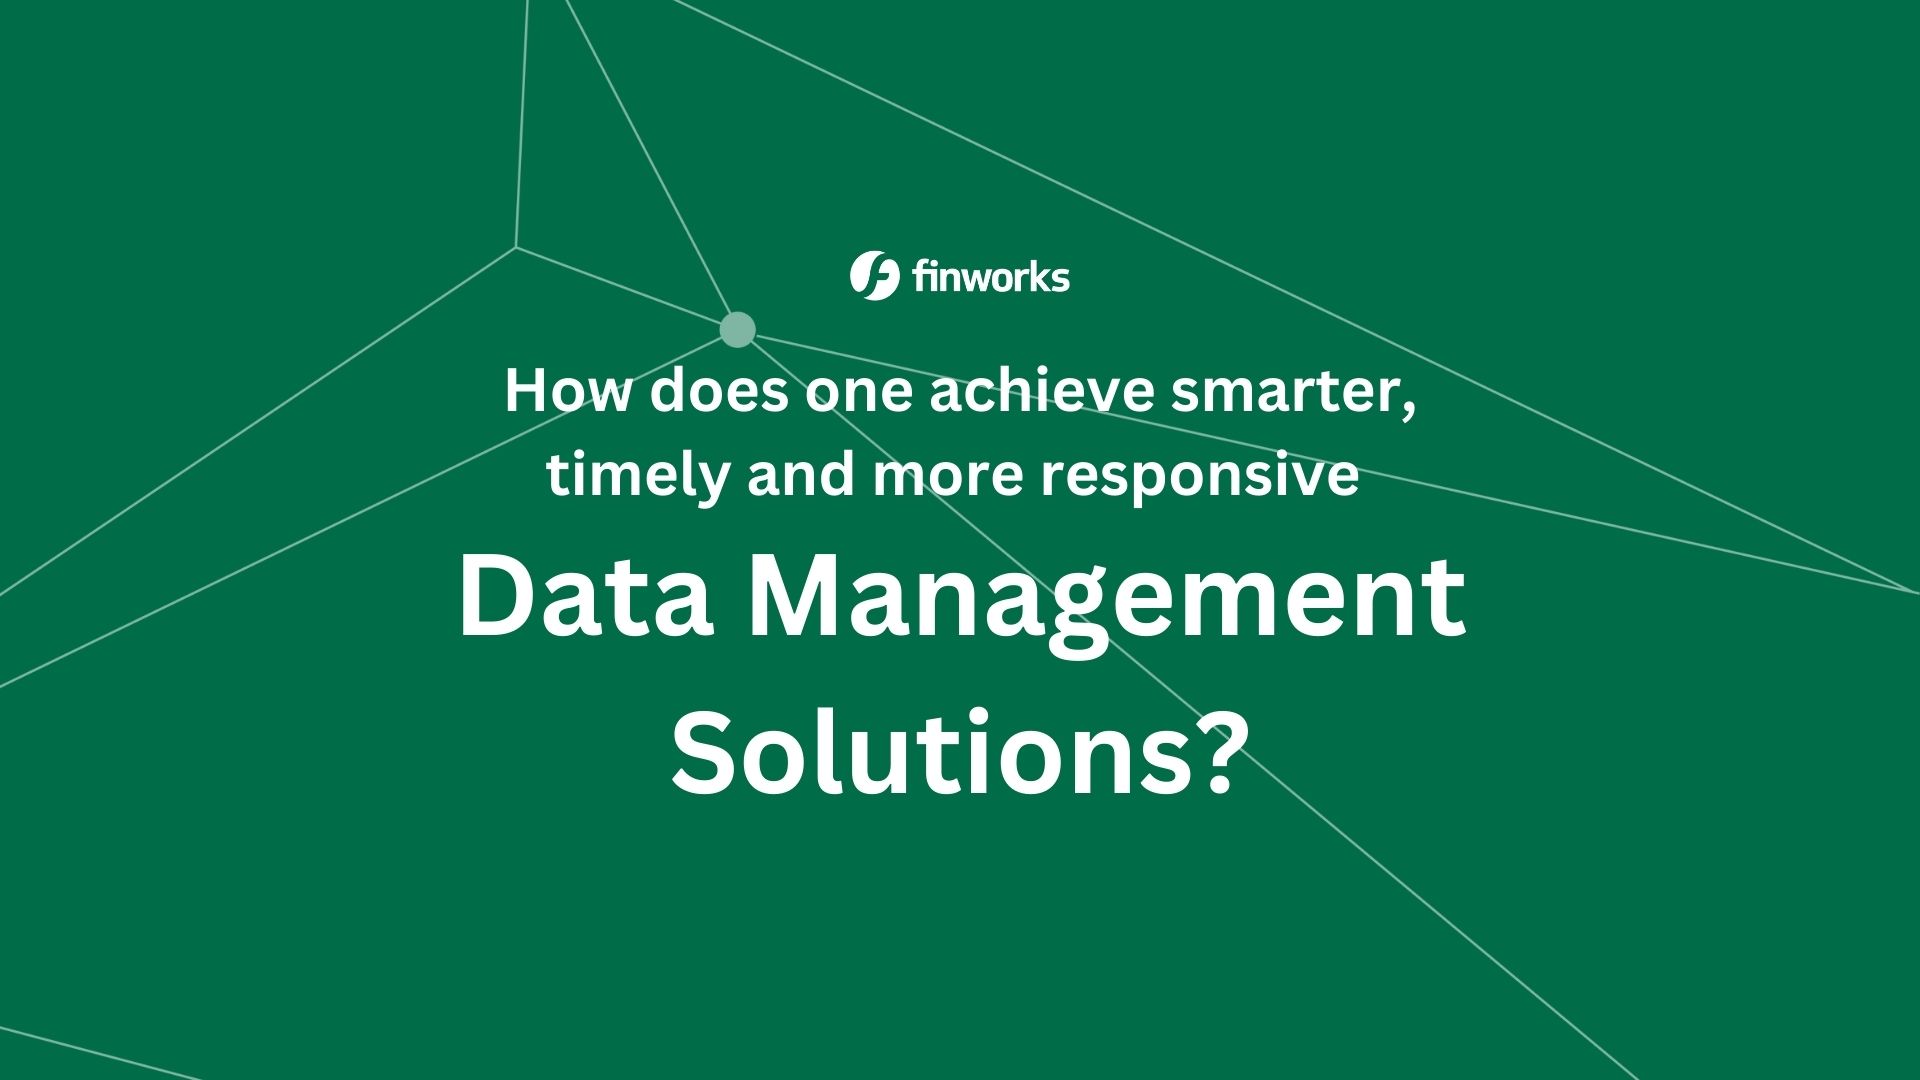 How can data be managed smarter, faster, and more effectively?